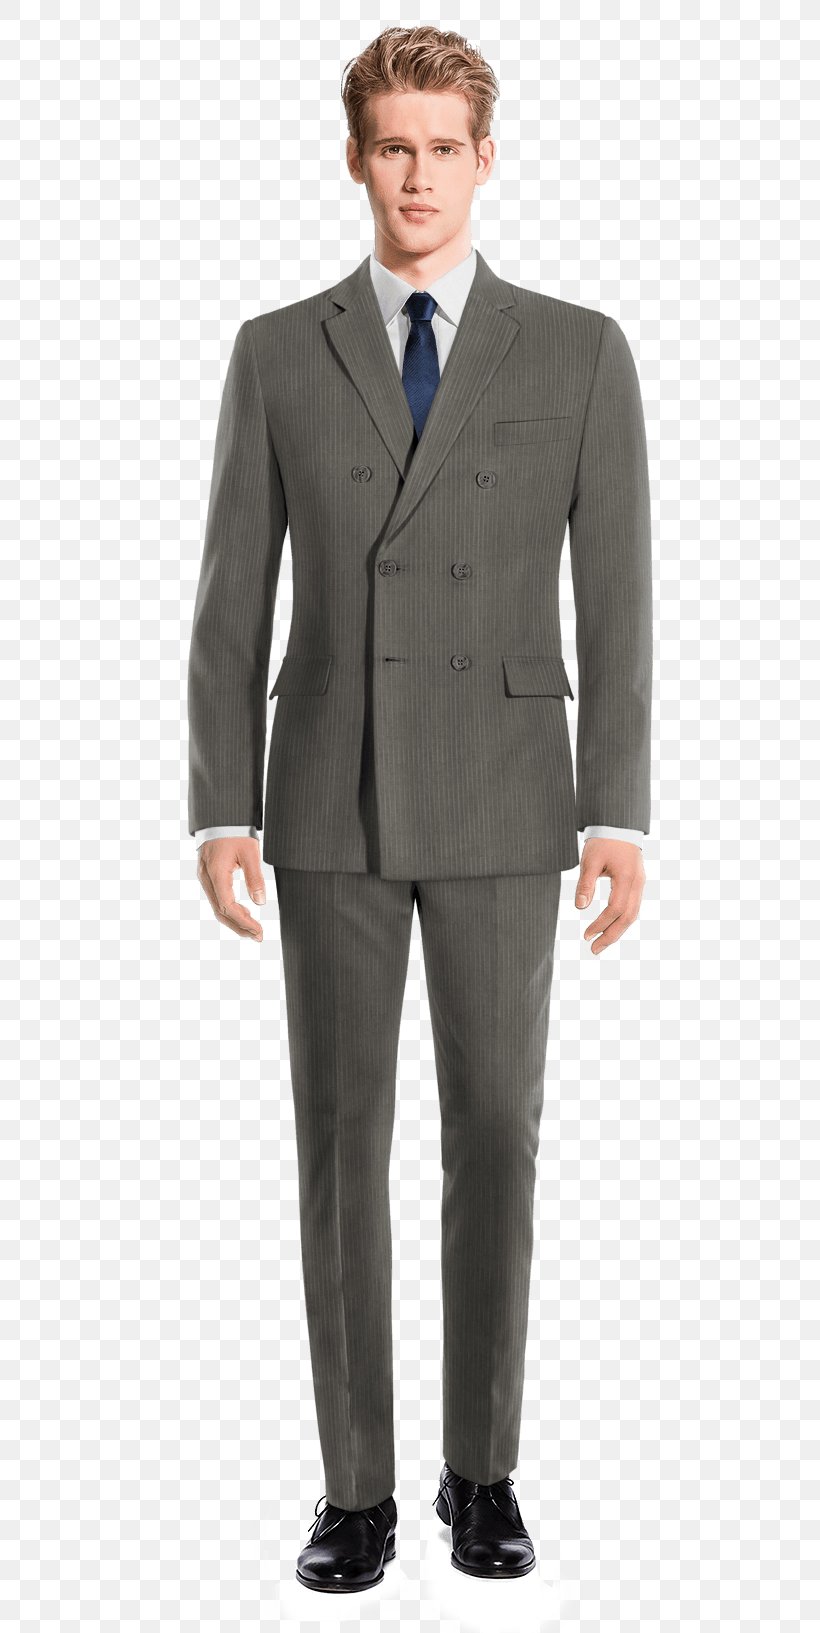 Suit Tuxedo Double-breasted Tweed Black Tie, PNG, 600x1633px, Suit, Black Tie, Blazer, Business, Businessperson Download Free